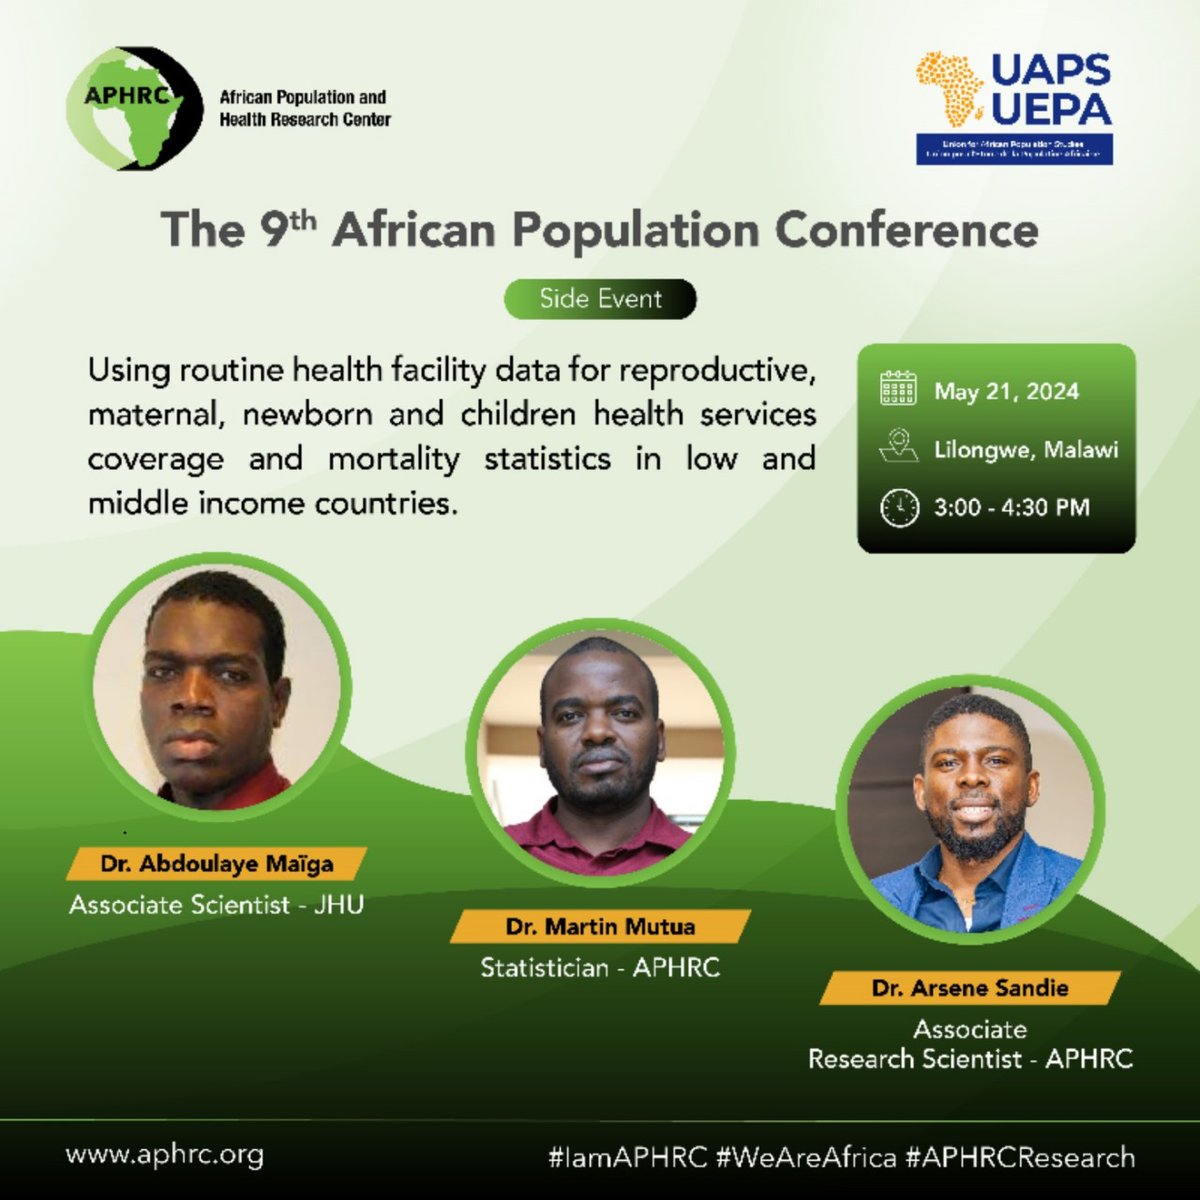 APHRC at The 9th Africa Population Conference by @UAPS_UEPA.

Join us for an informative session on reproductive, maternal, newborn, and children's health services.

#APC2024 #9thAPC #APCMalawi #WeAreAfrica #APHRCResearch